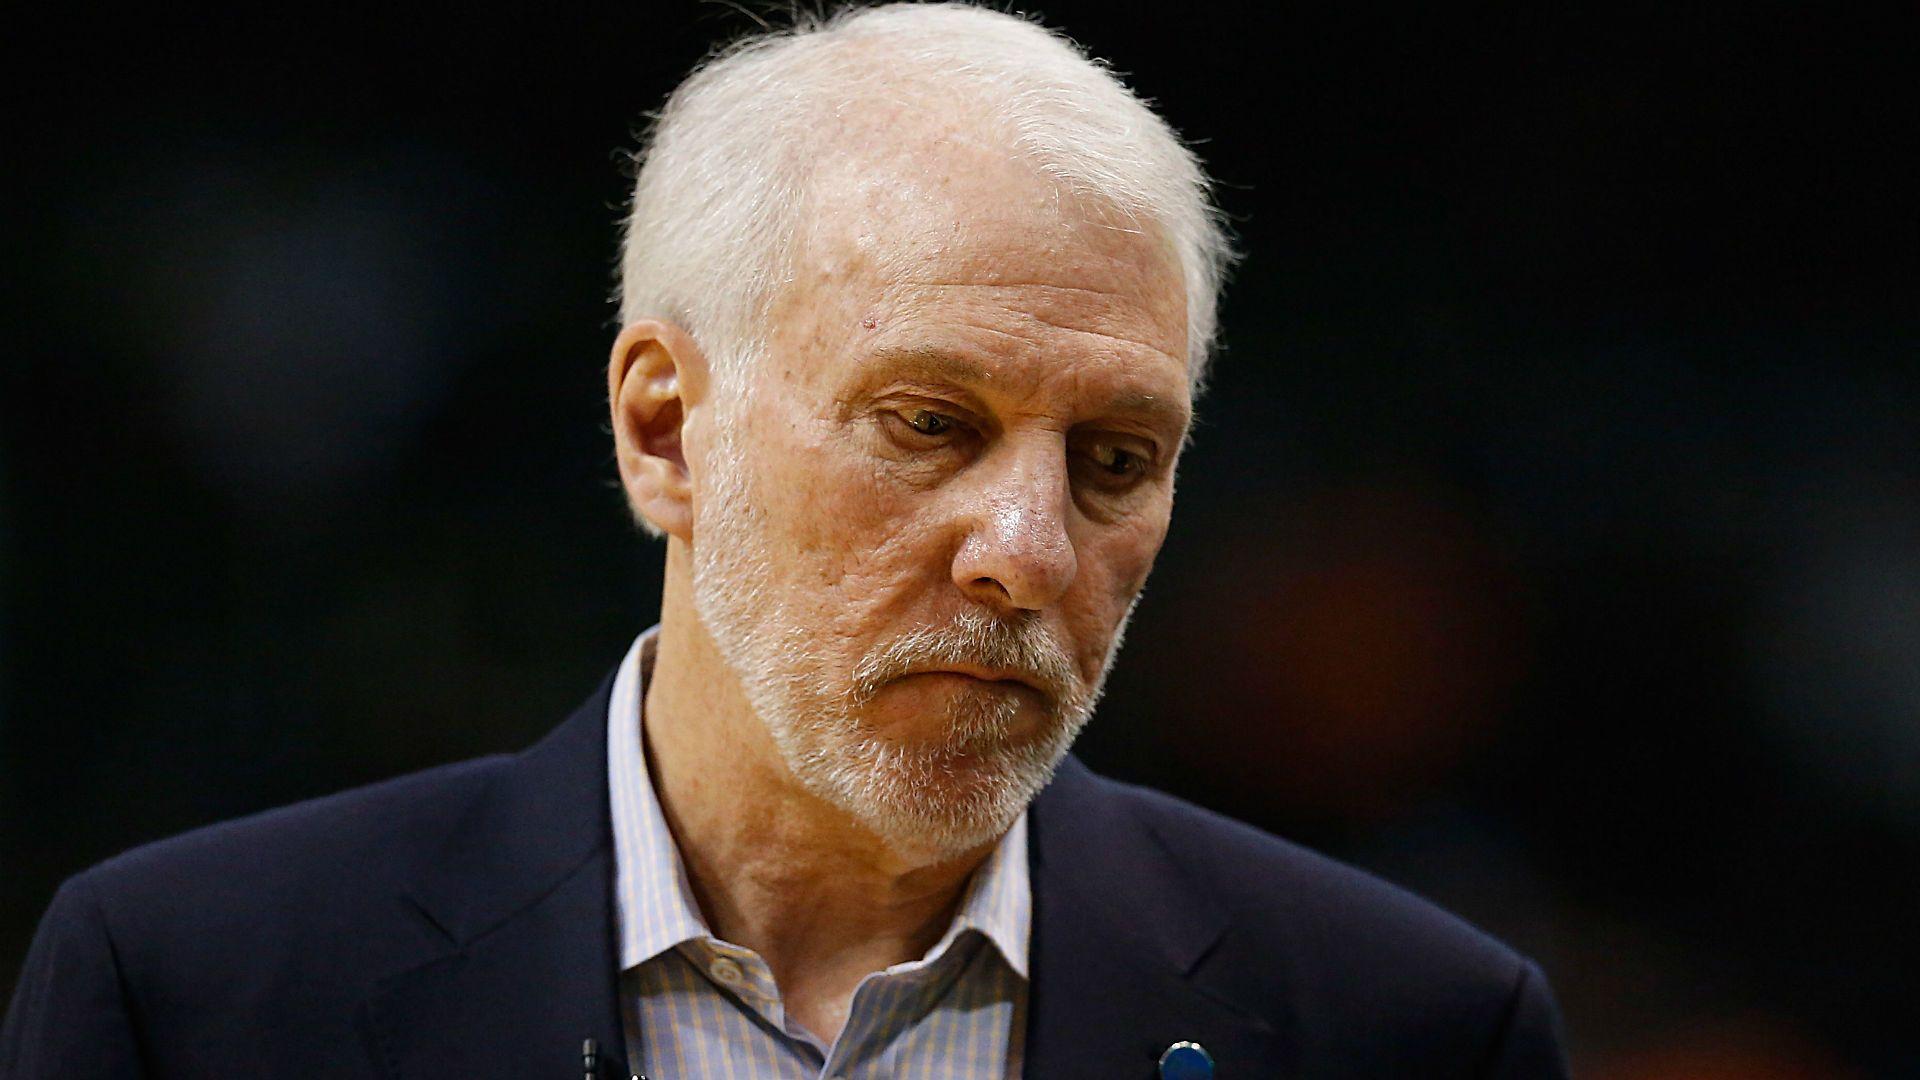 Gregg Popovich has, uh, thoughts on New Hampshire results; Bernie